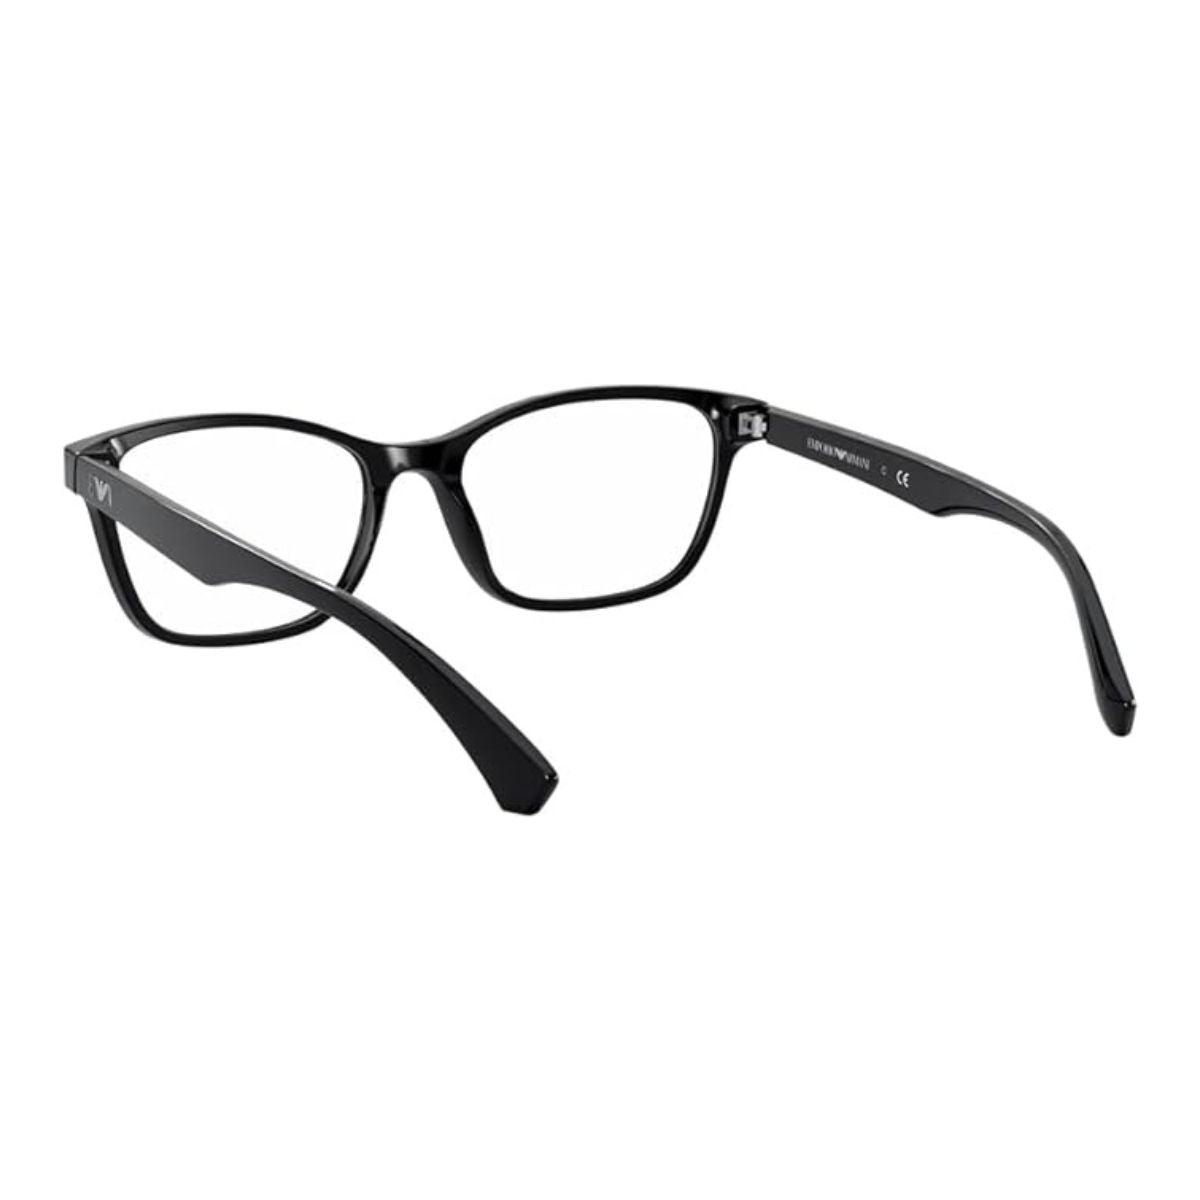 "stylish emporio armani 3157 5001 eye spectacles frames for women's at optorium"